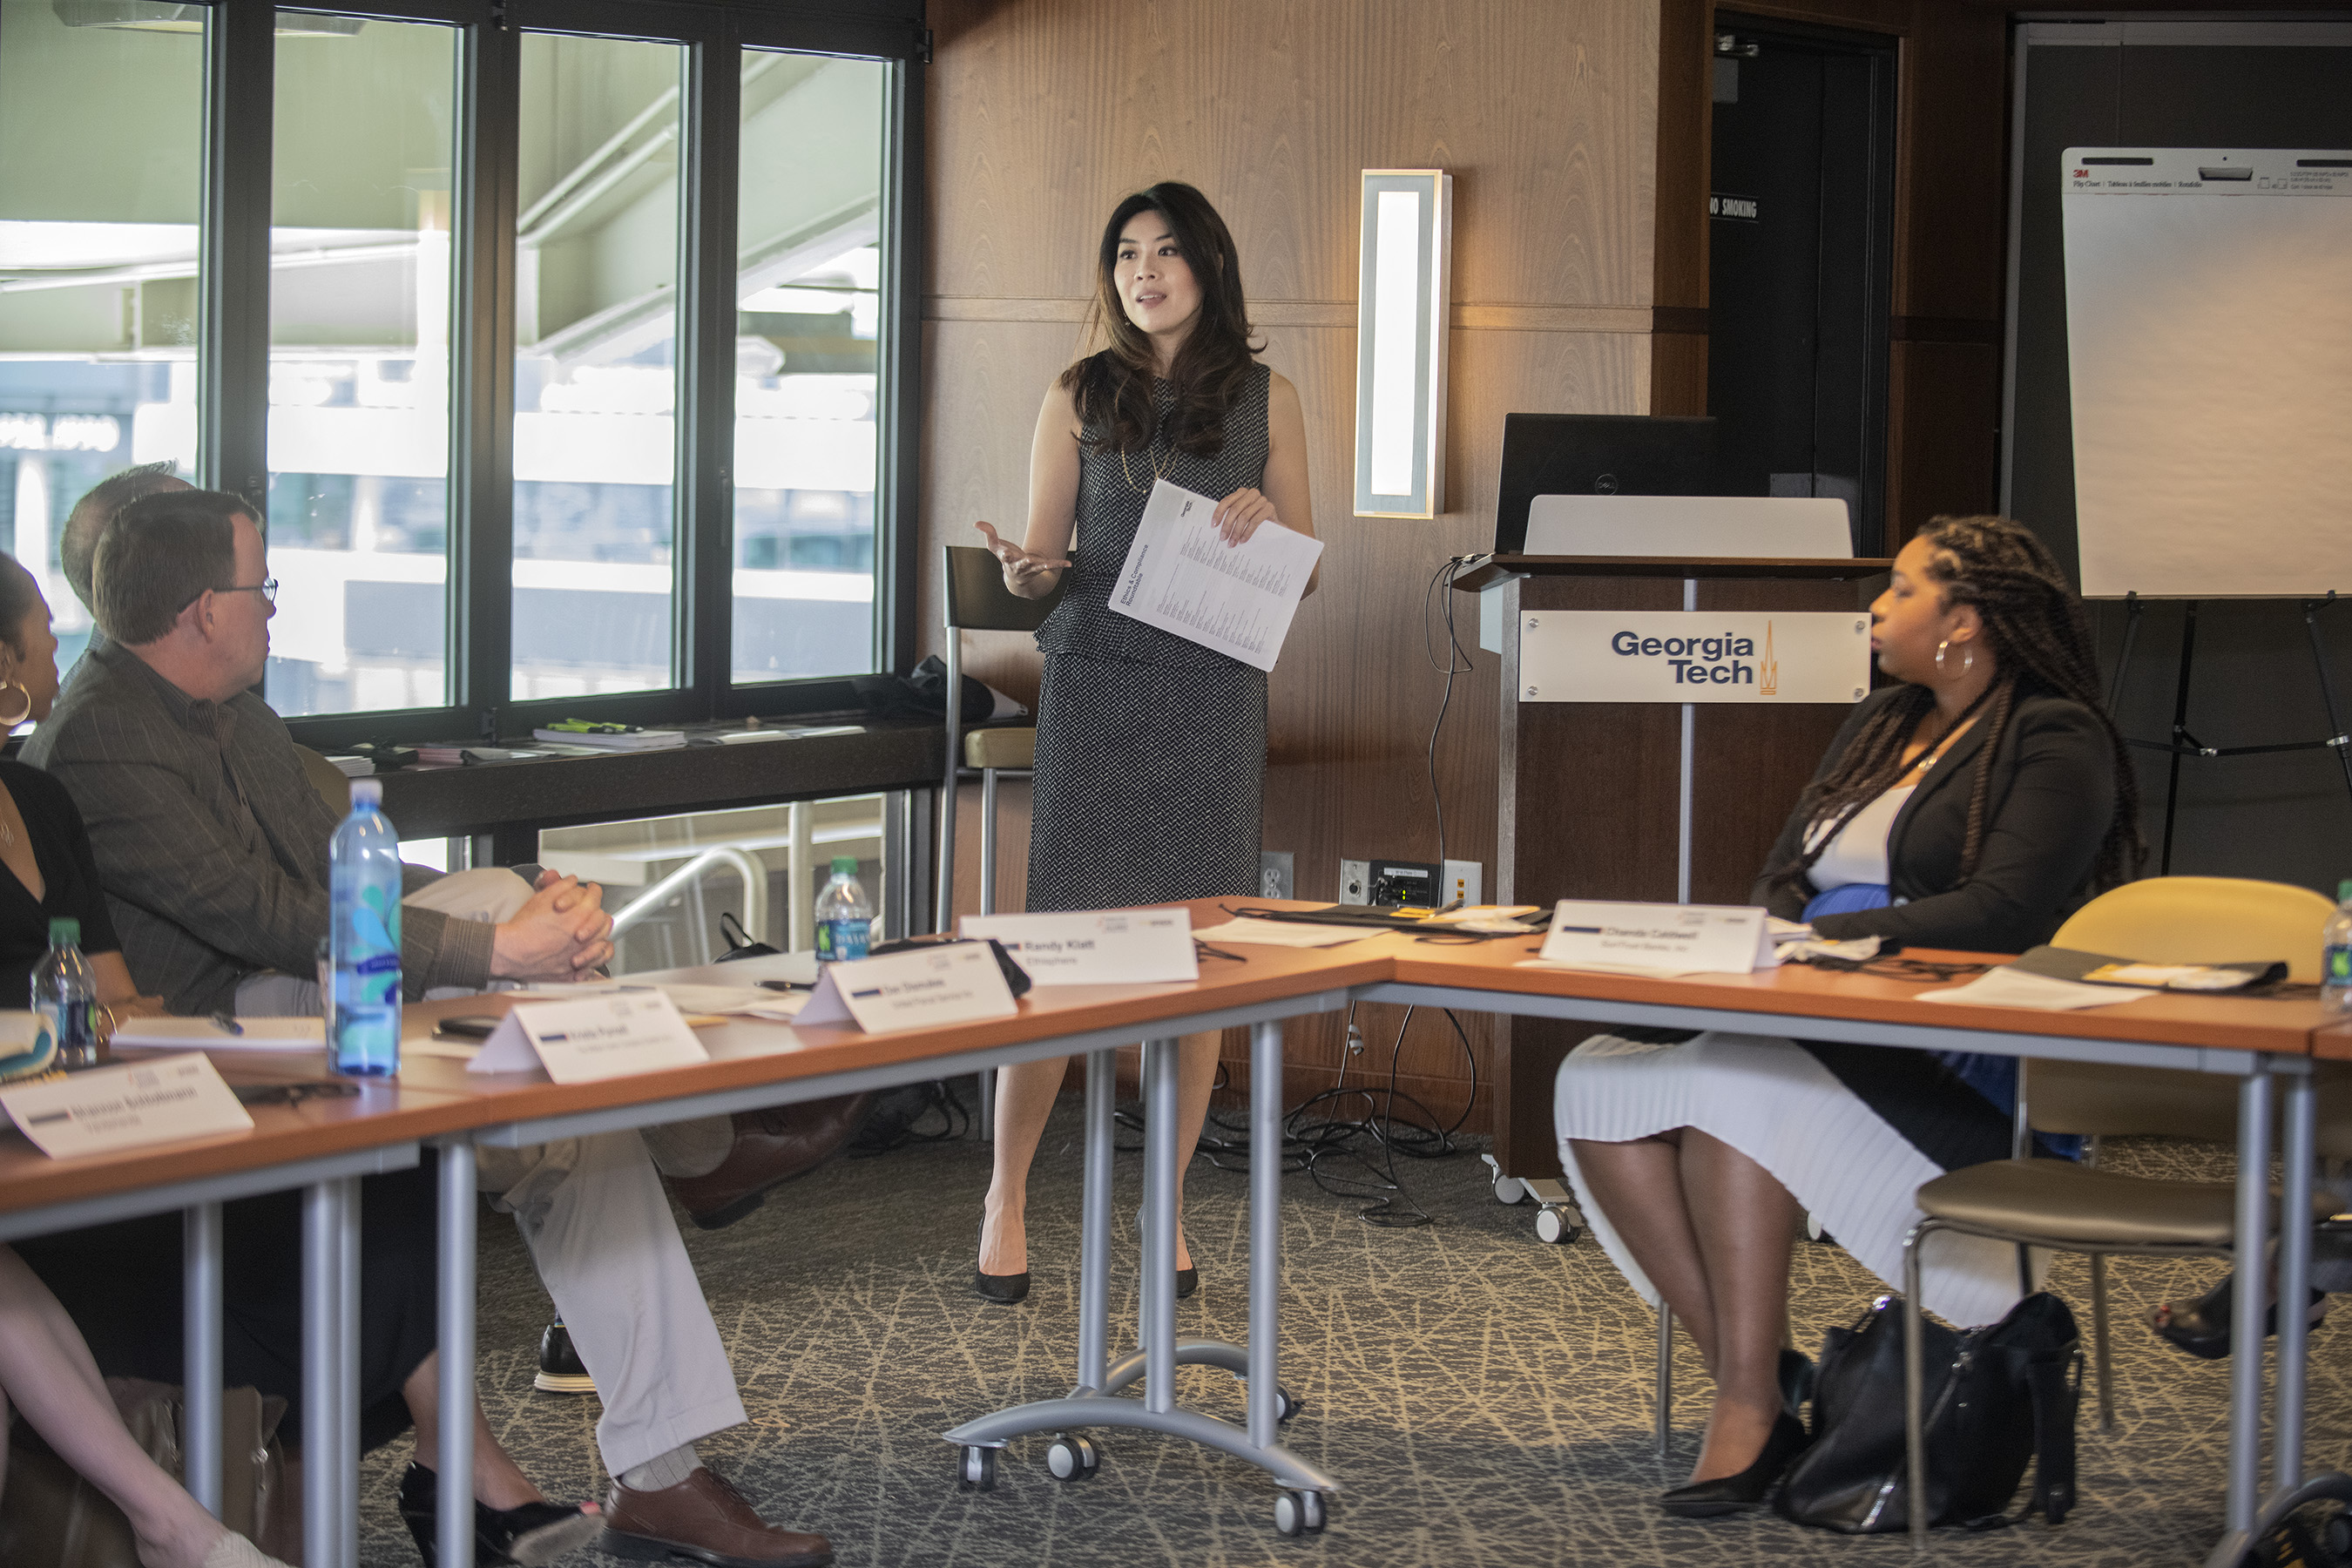 Ling-Ling Nie, Tech’s general counsel and vice president for Ethics and Compliance, led a discussion on “Adapting to the Compliance Function in a New Industry.”